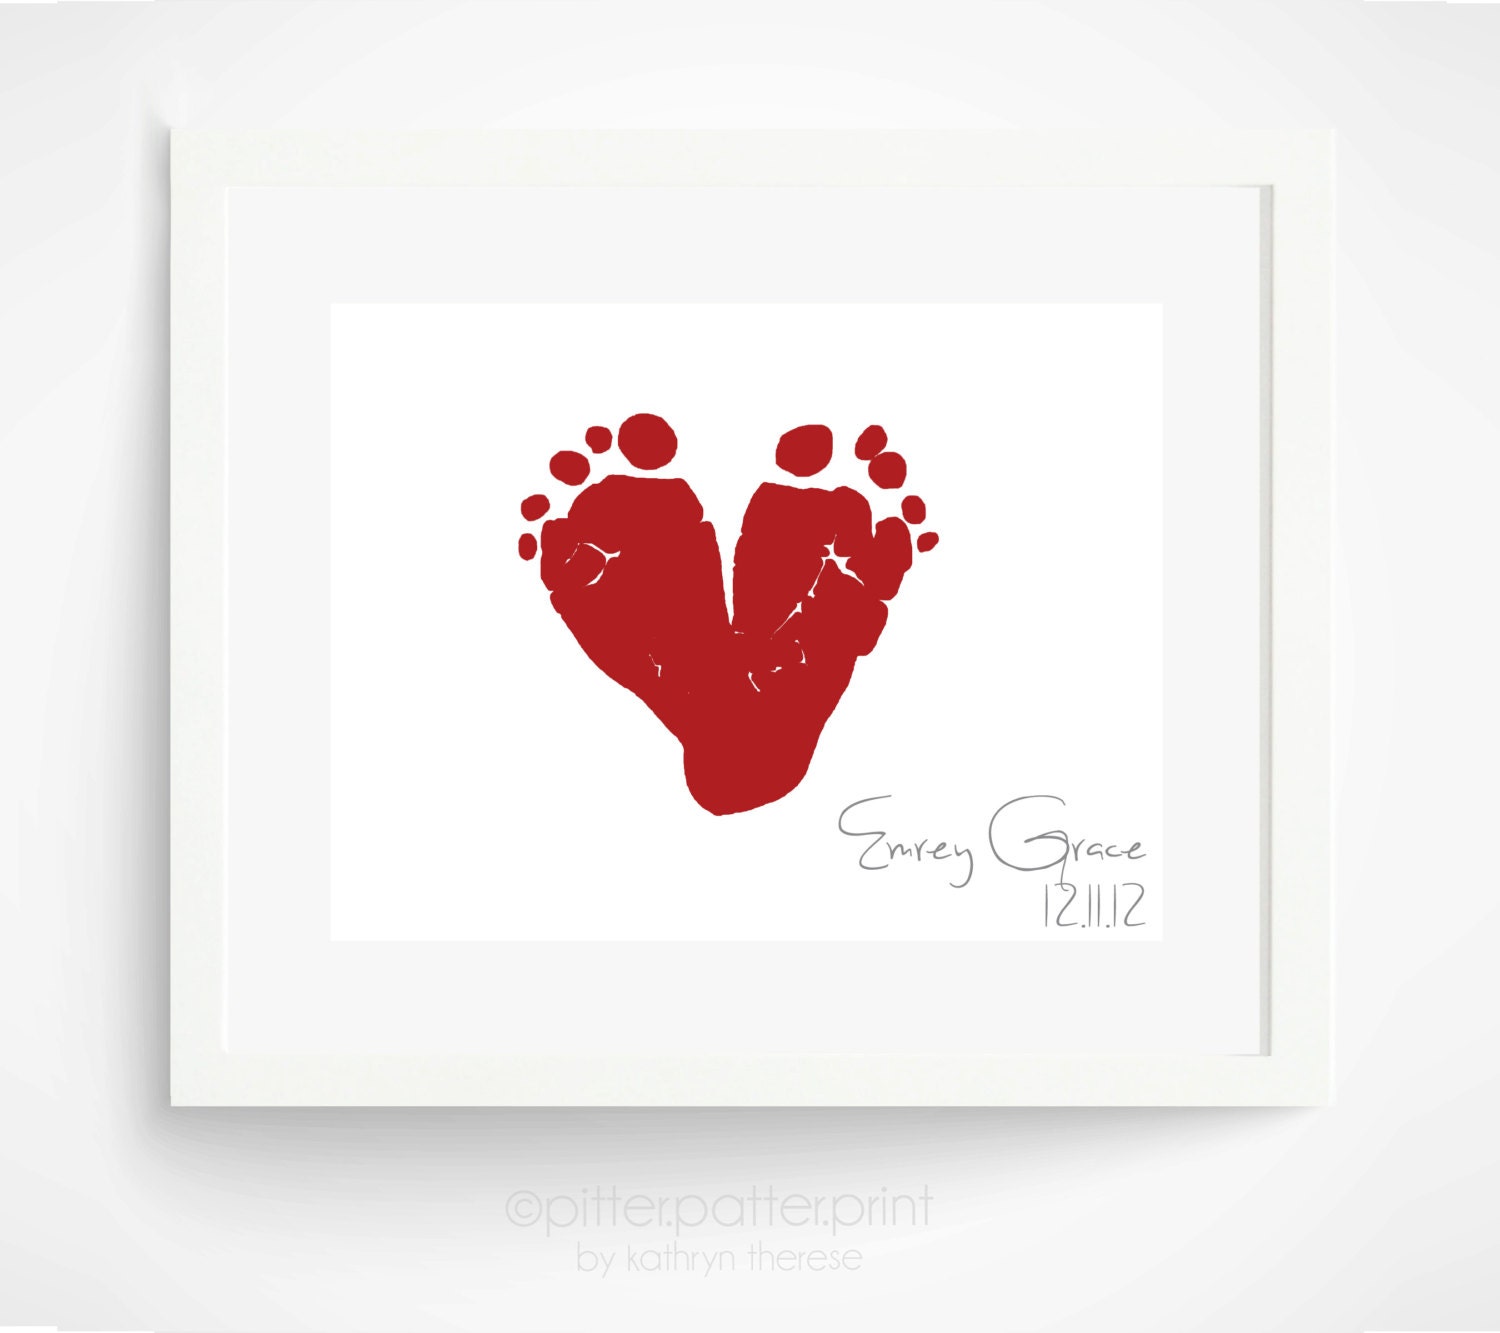 Baby's First Christmas - Gift for New Dad, Gift for New Grandmother - Red Heart Baby Footprint Wall Art - Personalized Holiday Decor - PitterPatterPrint